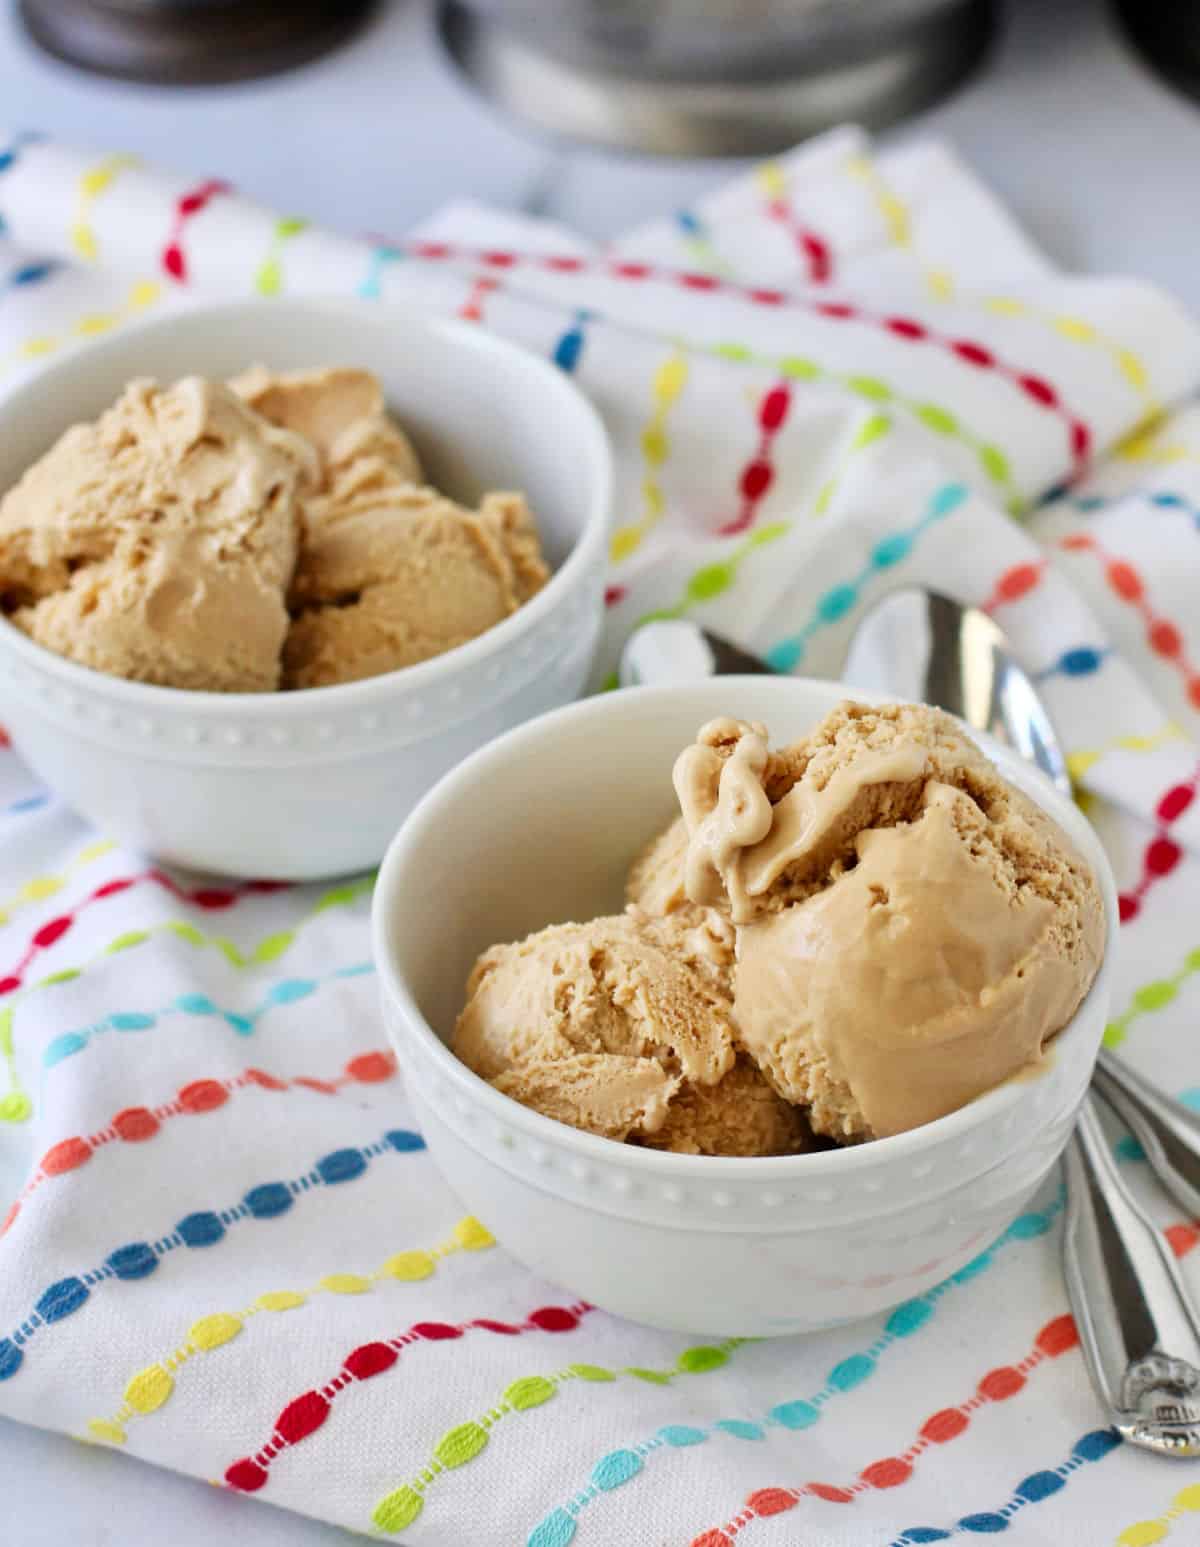 Coffee ice cream in two white bowls.